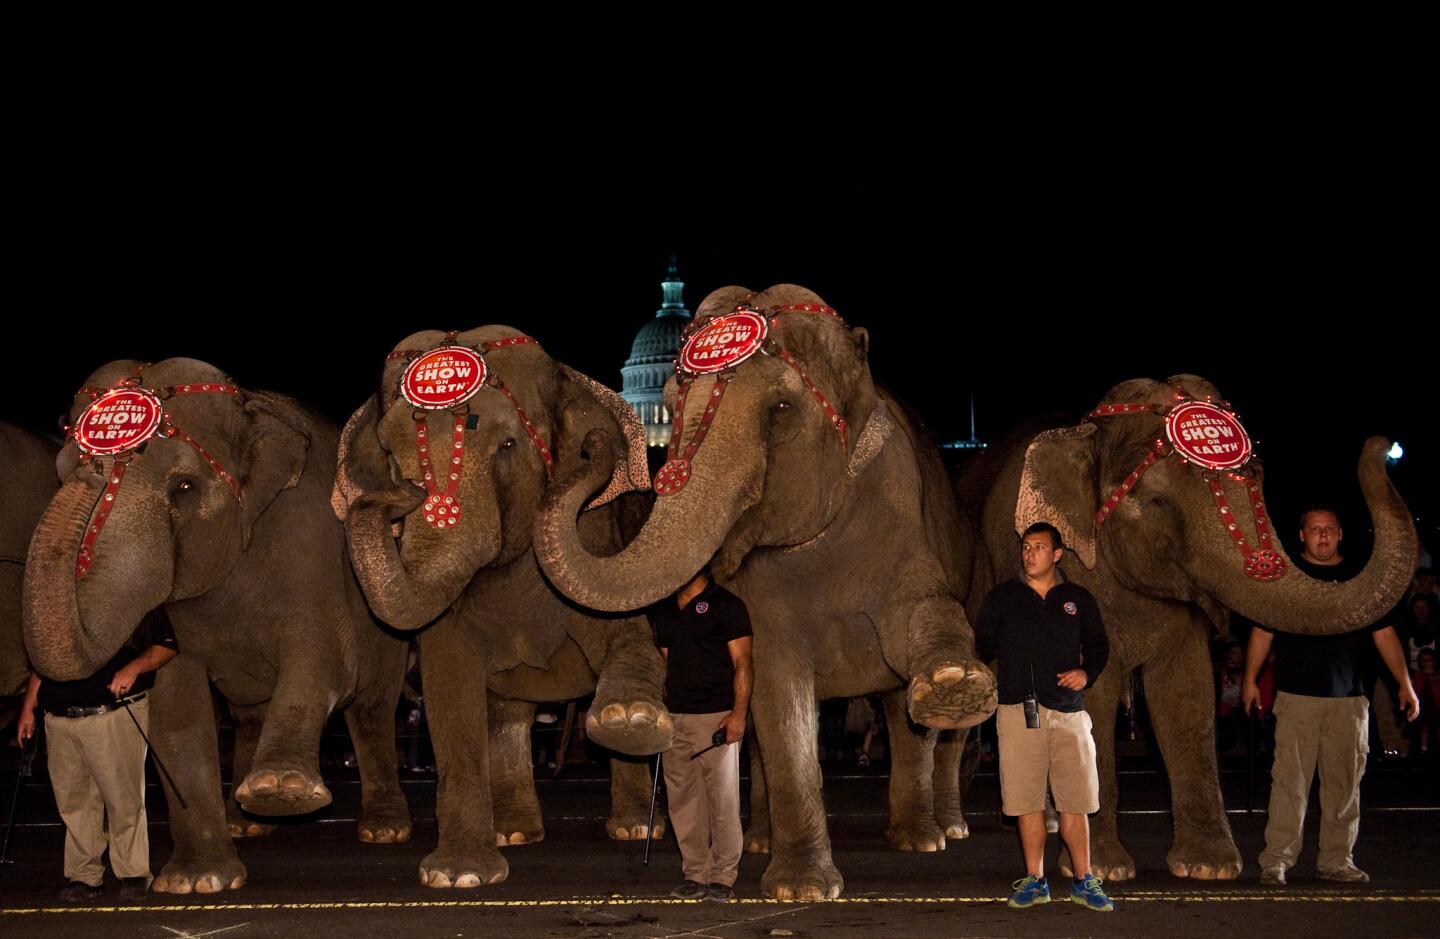 Elephants pose with their handlers in front of the US Capitol on March 13, 2012 during the annual Pachyderm Parade to celebrate the arrival of the Ringling Bros. and Barnum & Bailey Circus to Washington.